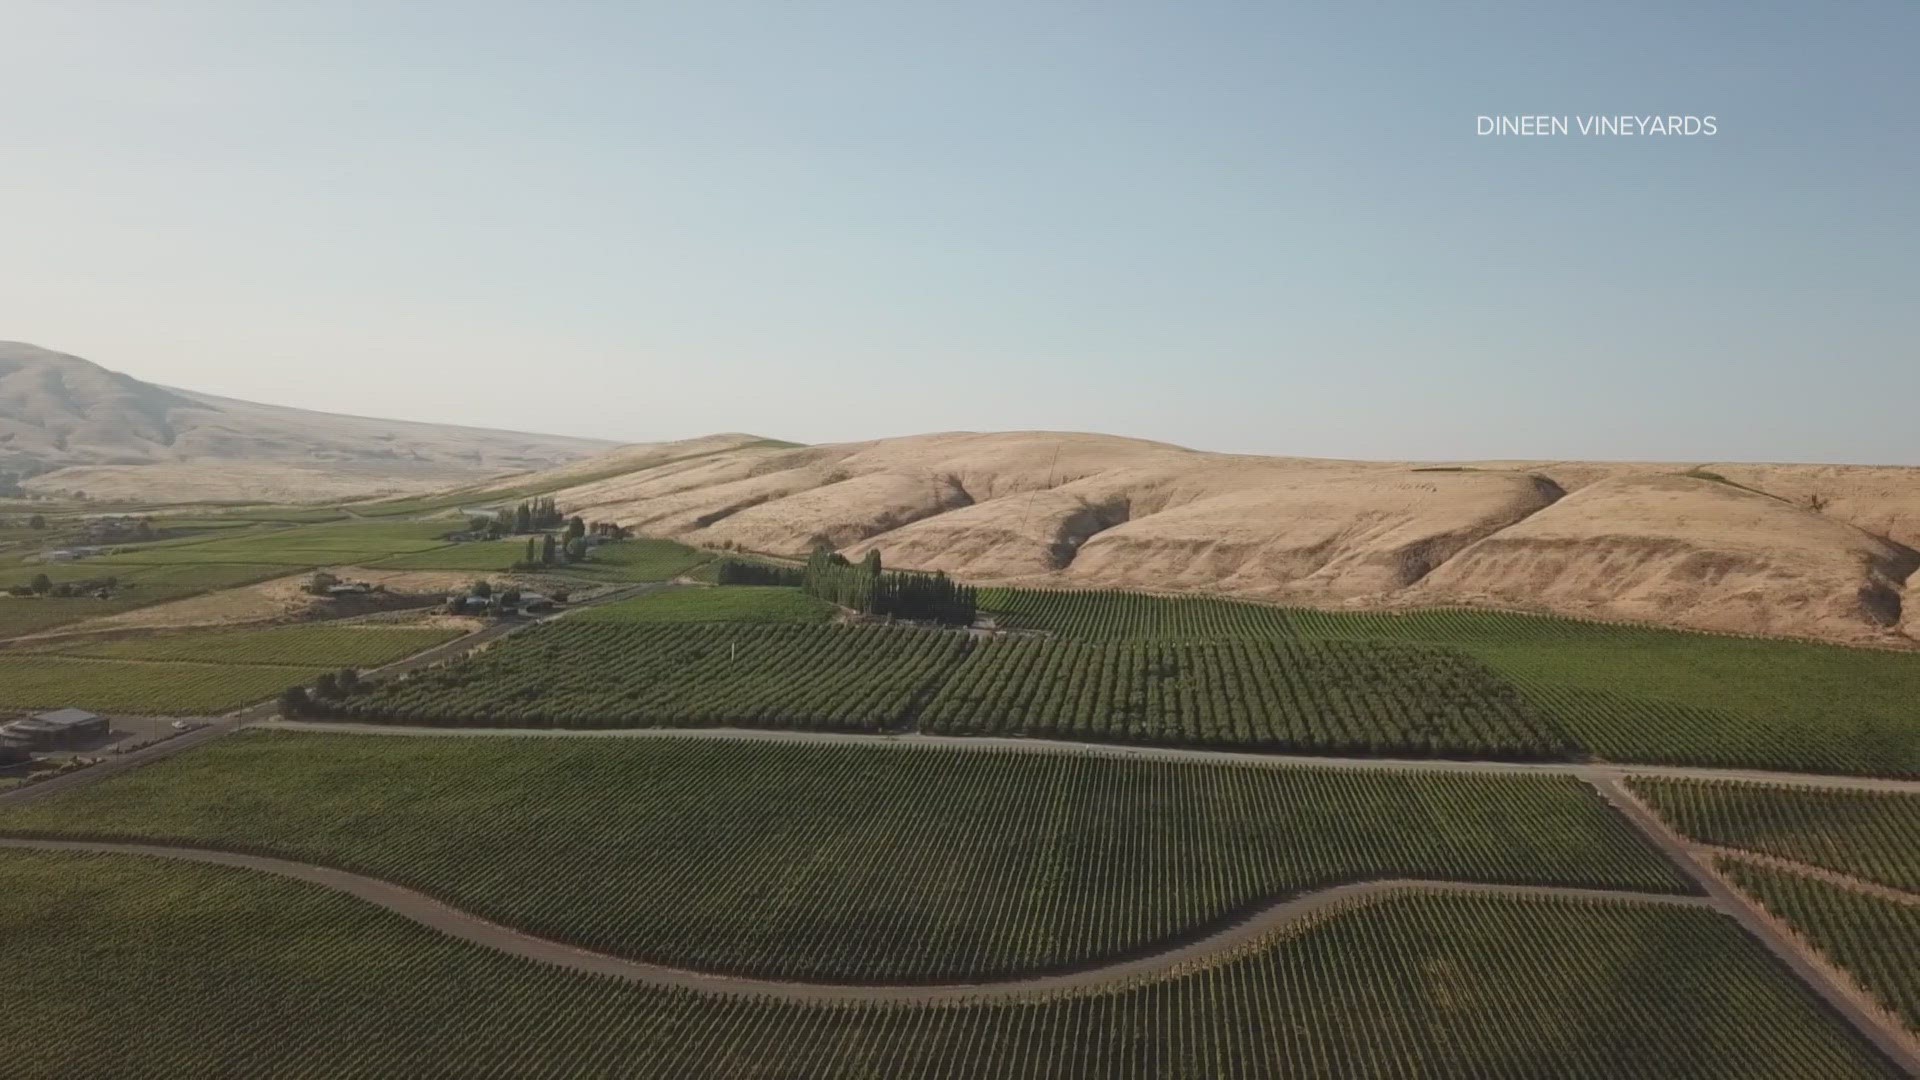 Dozens of vineyards are Sustainable WA certified or in the application process. Viticulture practices and soil management are among the areas audited.